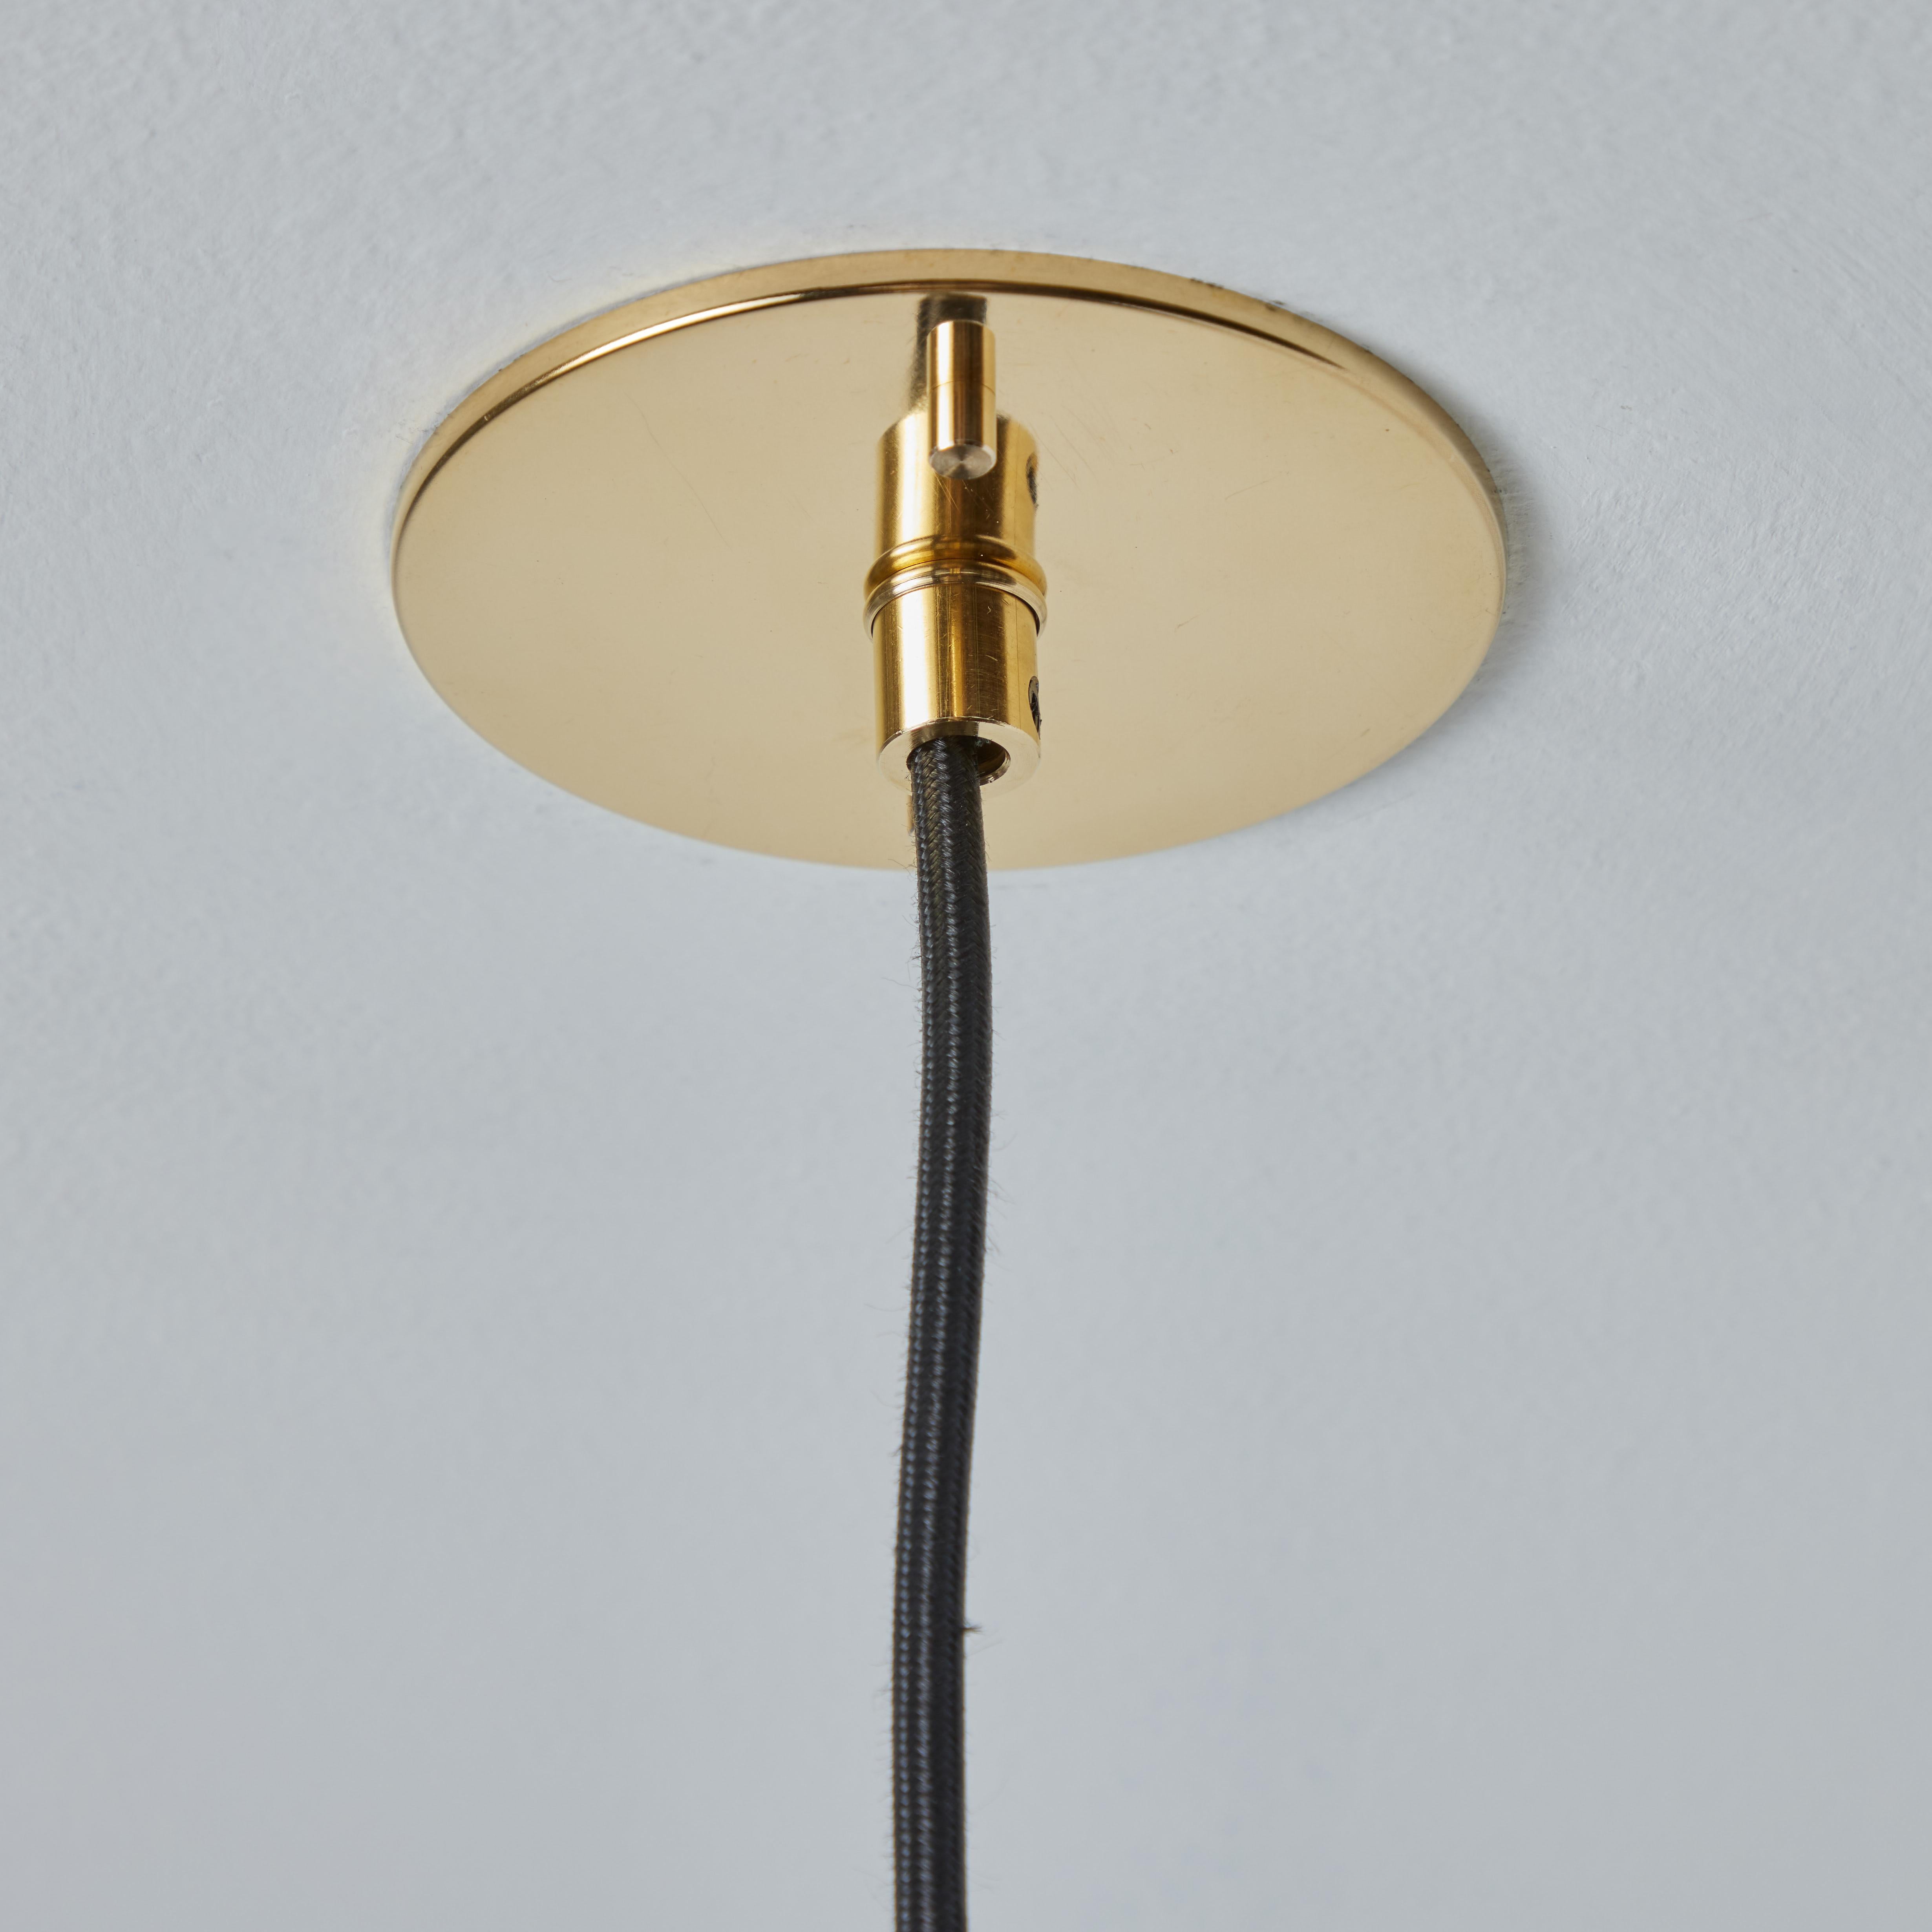 Mid-20th Century 1960s Opaline Glass and Brass Geometric Pendant Lamp Attributed to Mauri Almari For Sale